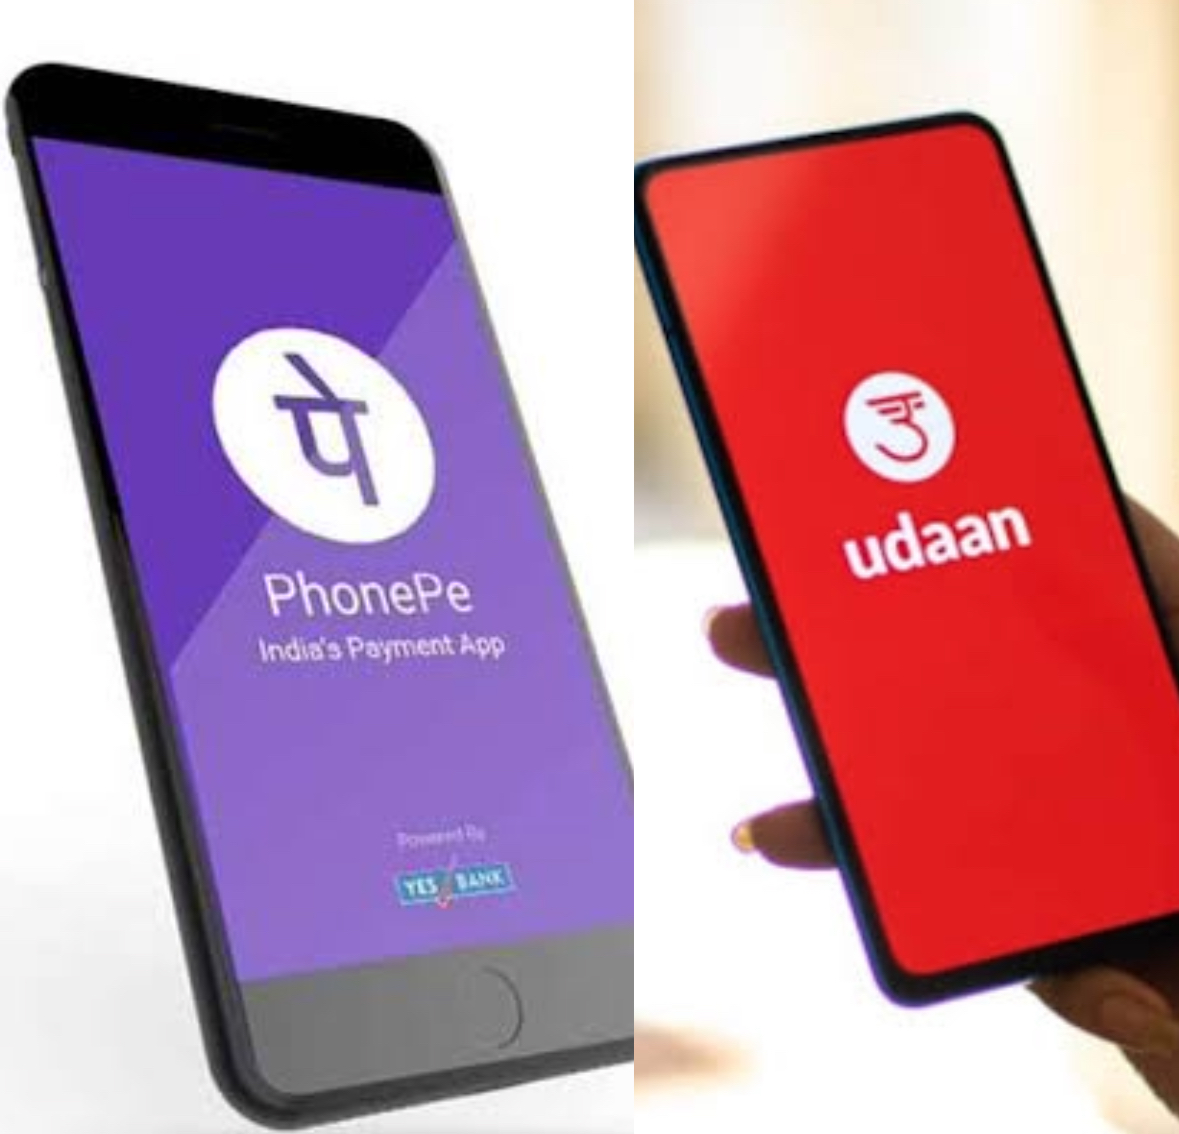 PhonePe and Udaan